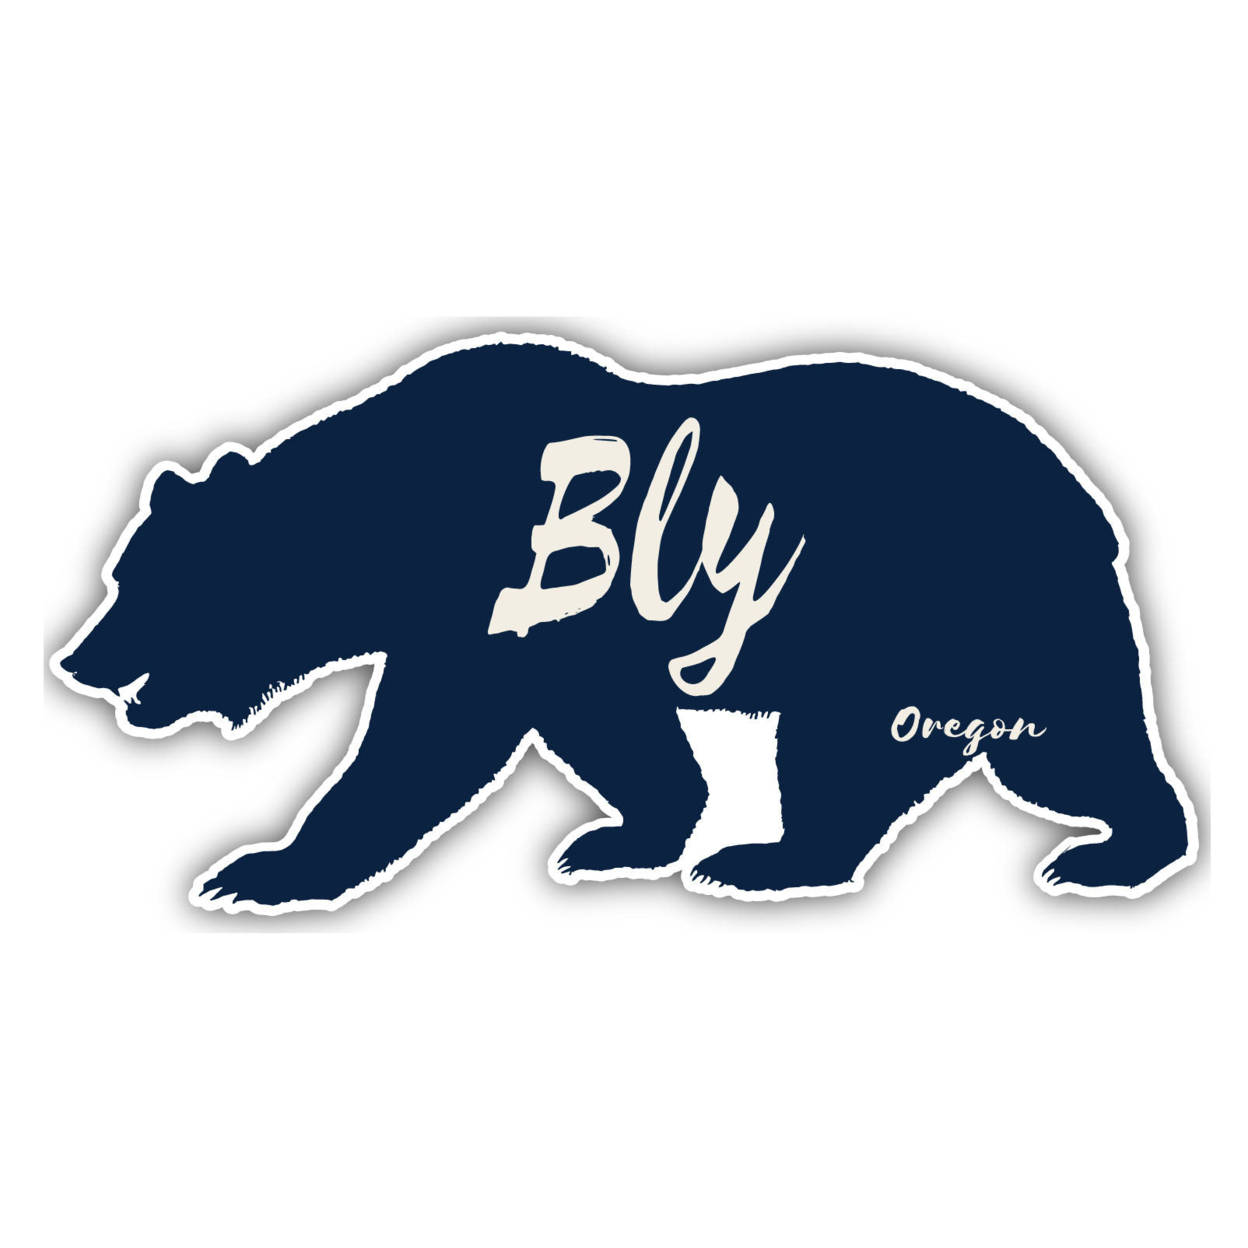 Bly Oregon Souvenir Decorative Stickers (Choose Theme And Size) - 4-Pack, 6-Inch, Bear